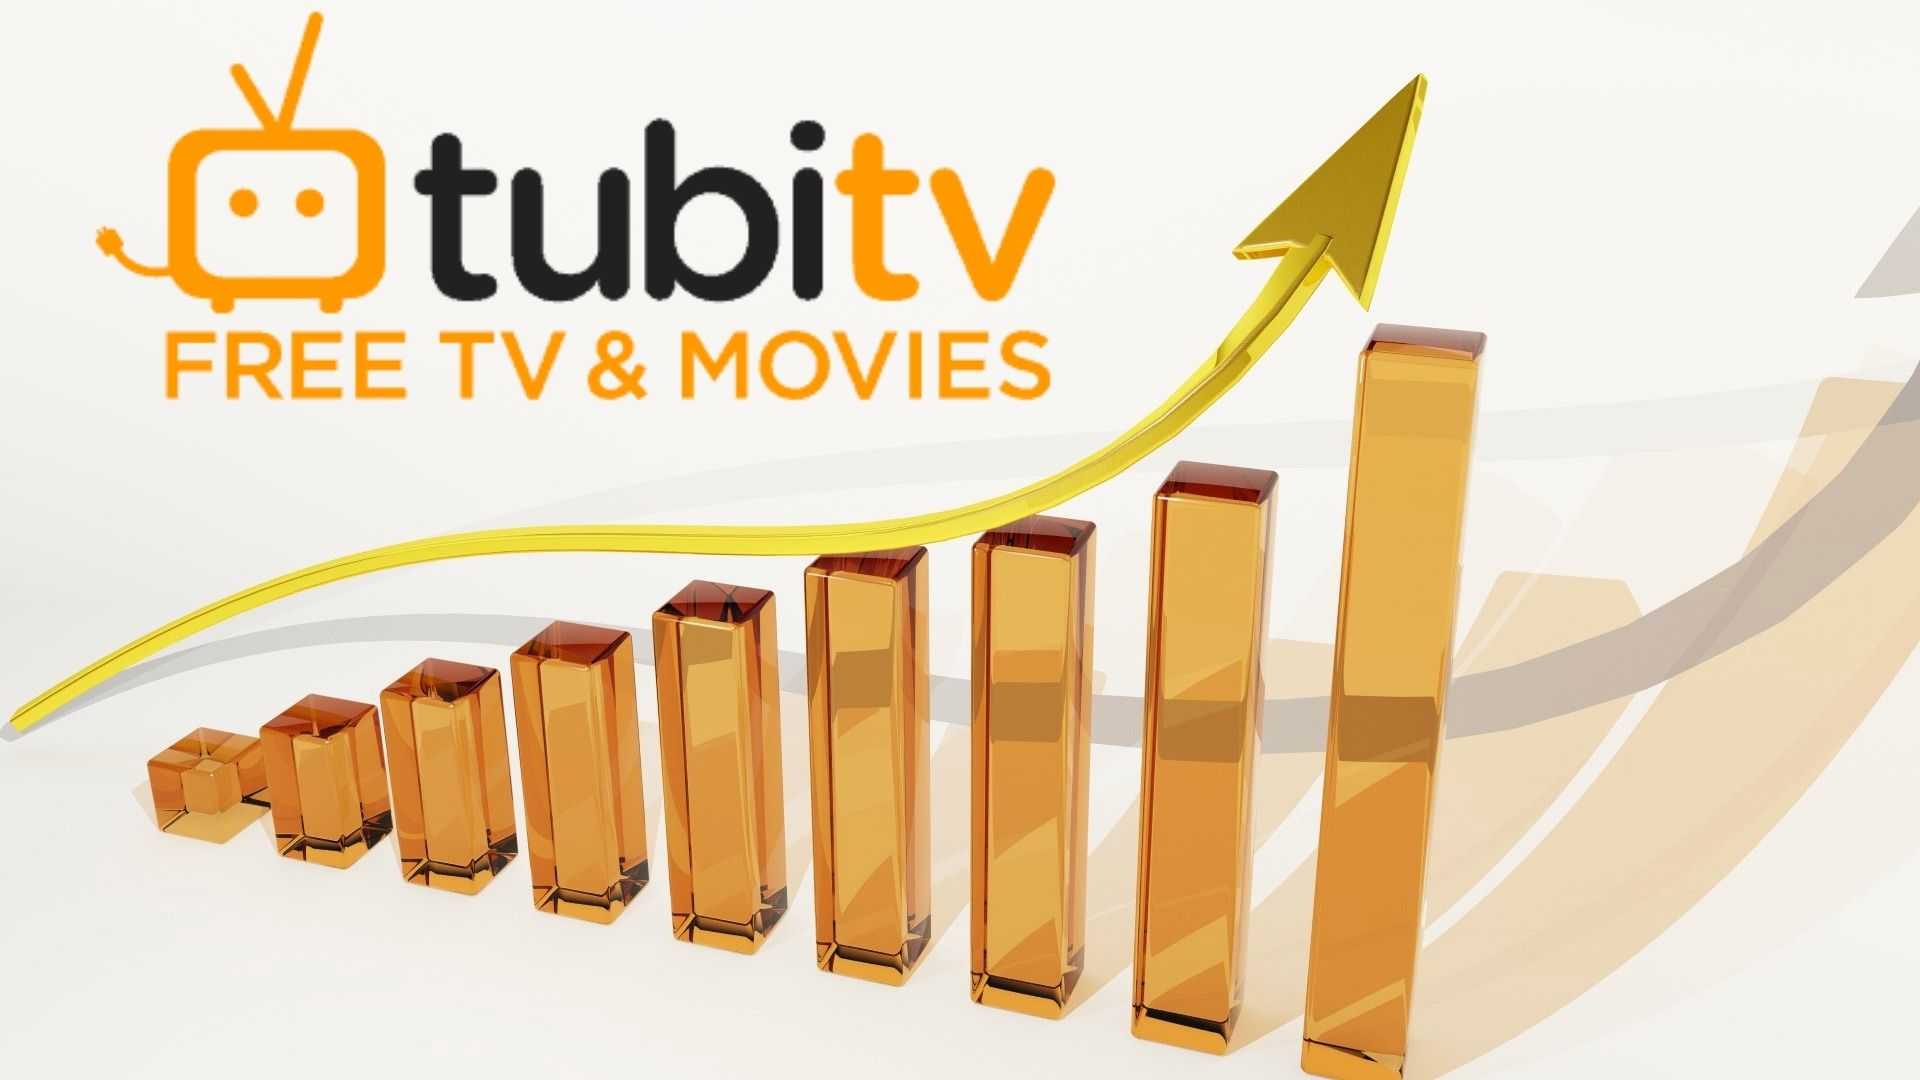 Tubi Says Streaming Rose 58% In 2020, With Half Of Viewers Younger Than 35, Apple TV+ has only reached a 3% share in the U.S. streaming market and other top news